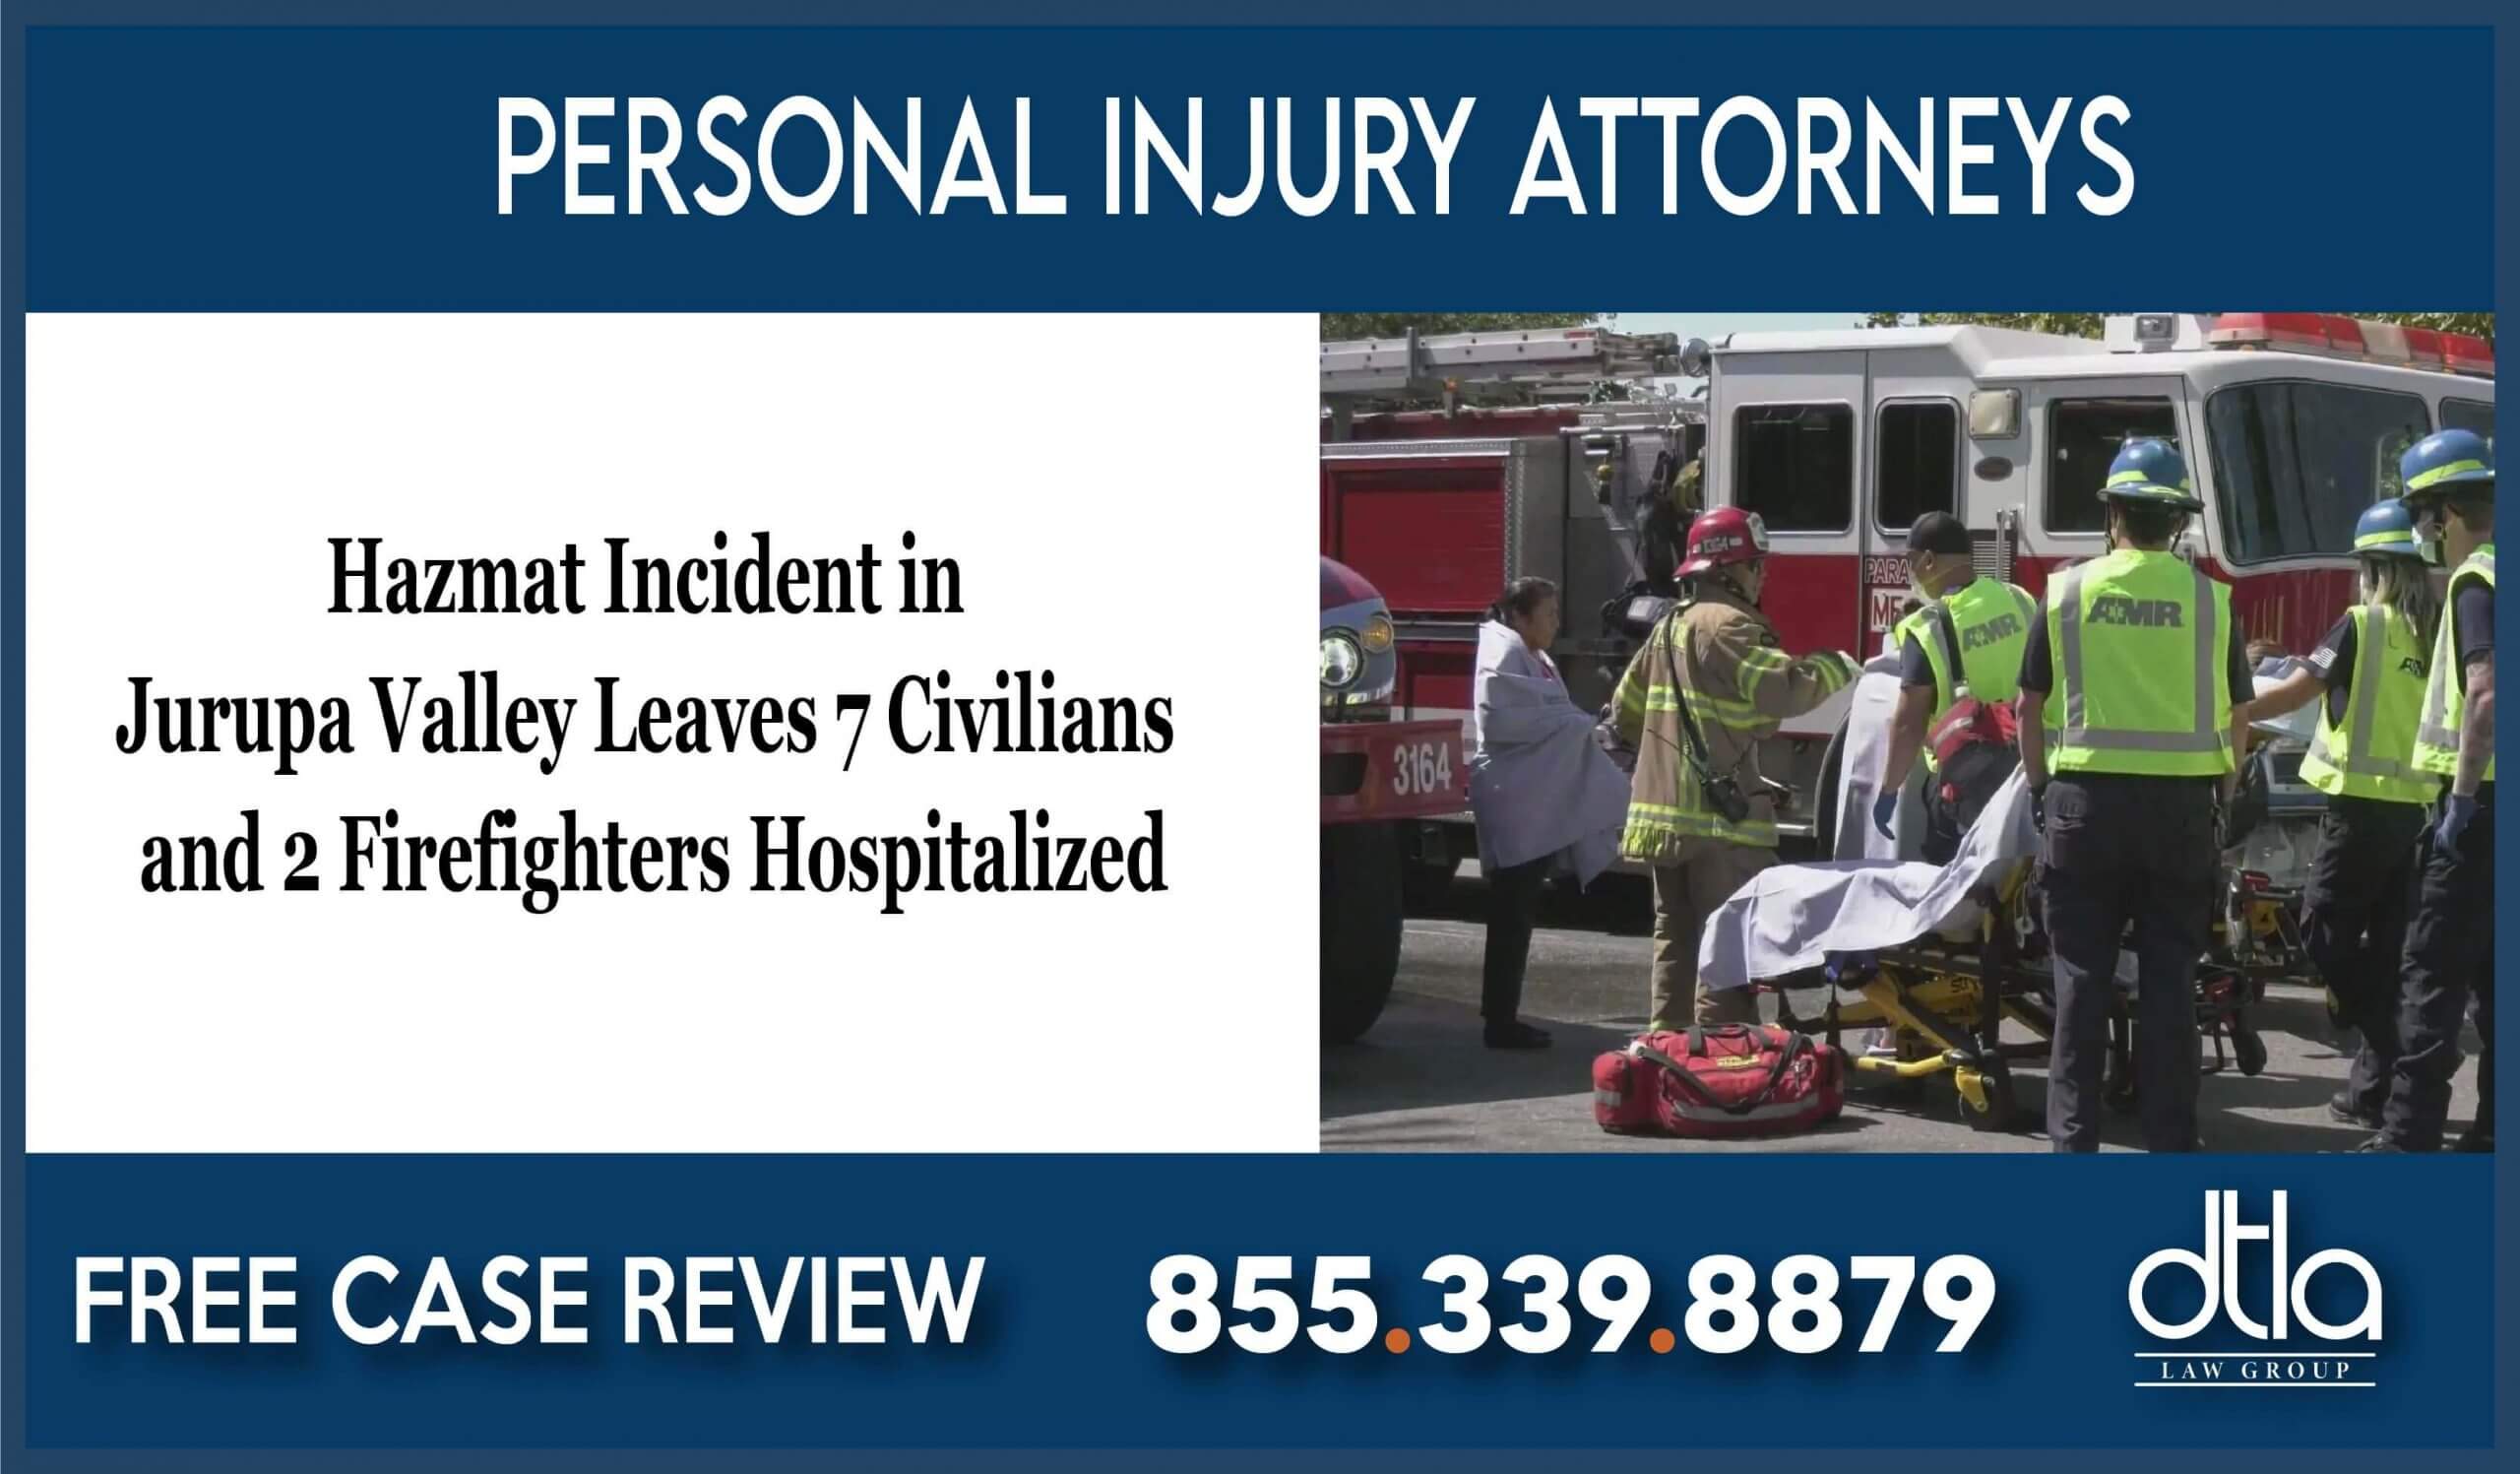 Hazmat Incident in Jurupa Valley Leaves 7 Civilians and 2 Firefighters Hospitalized lawyer injury incident accident liability